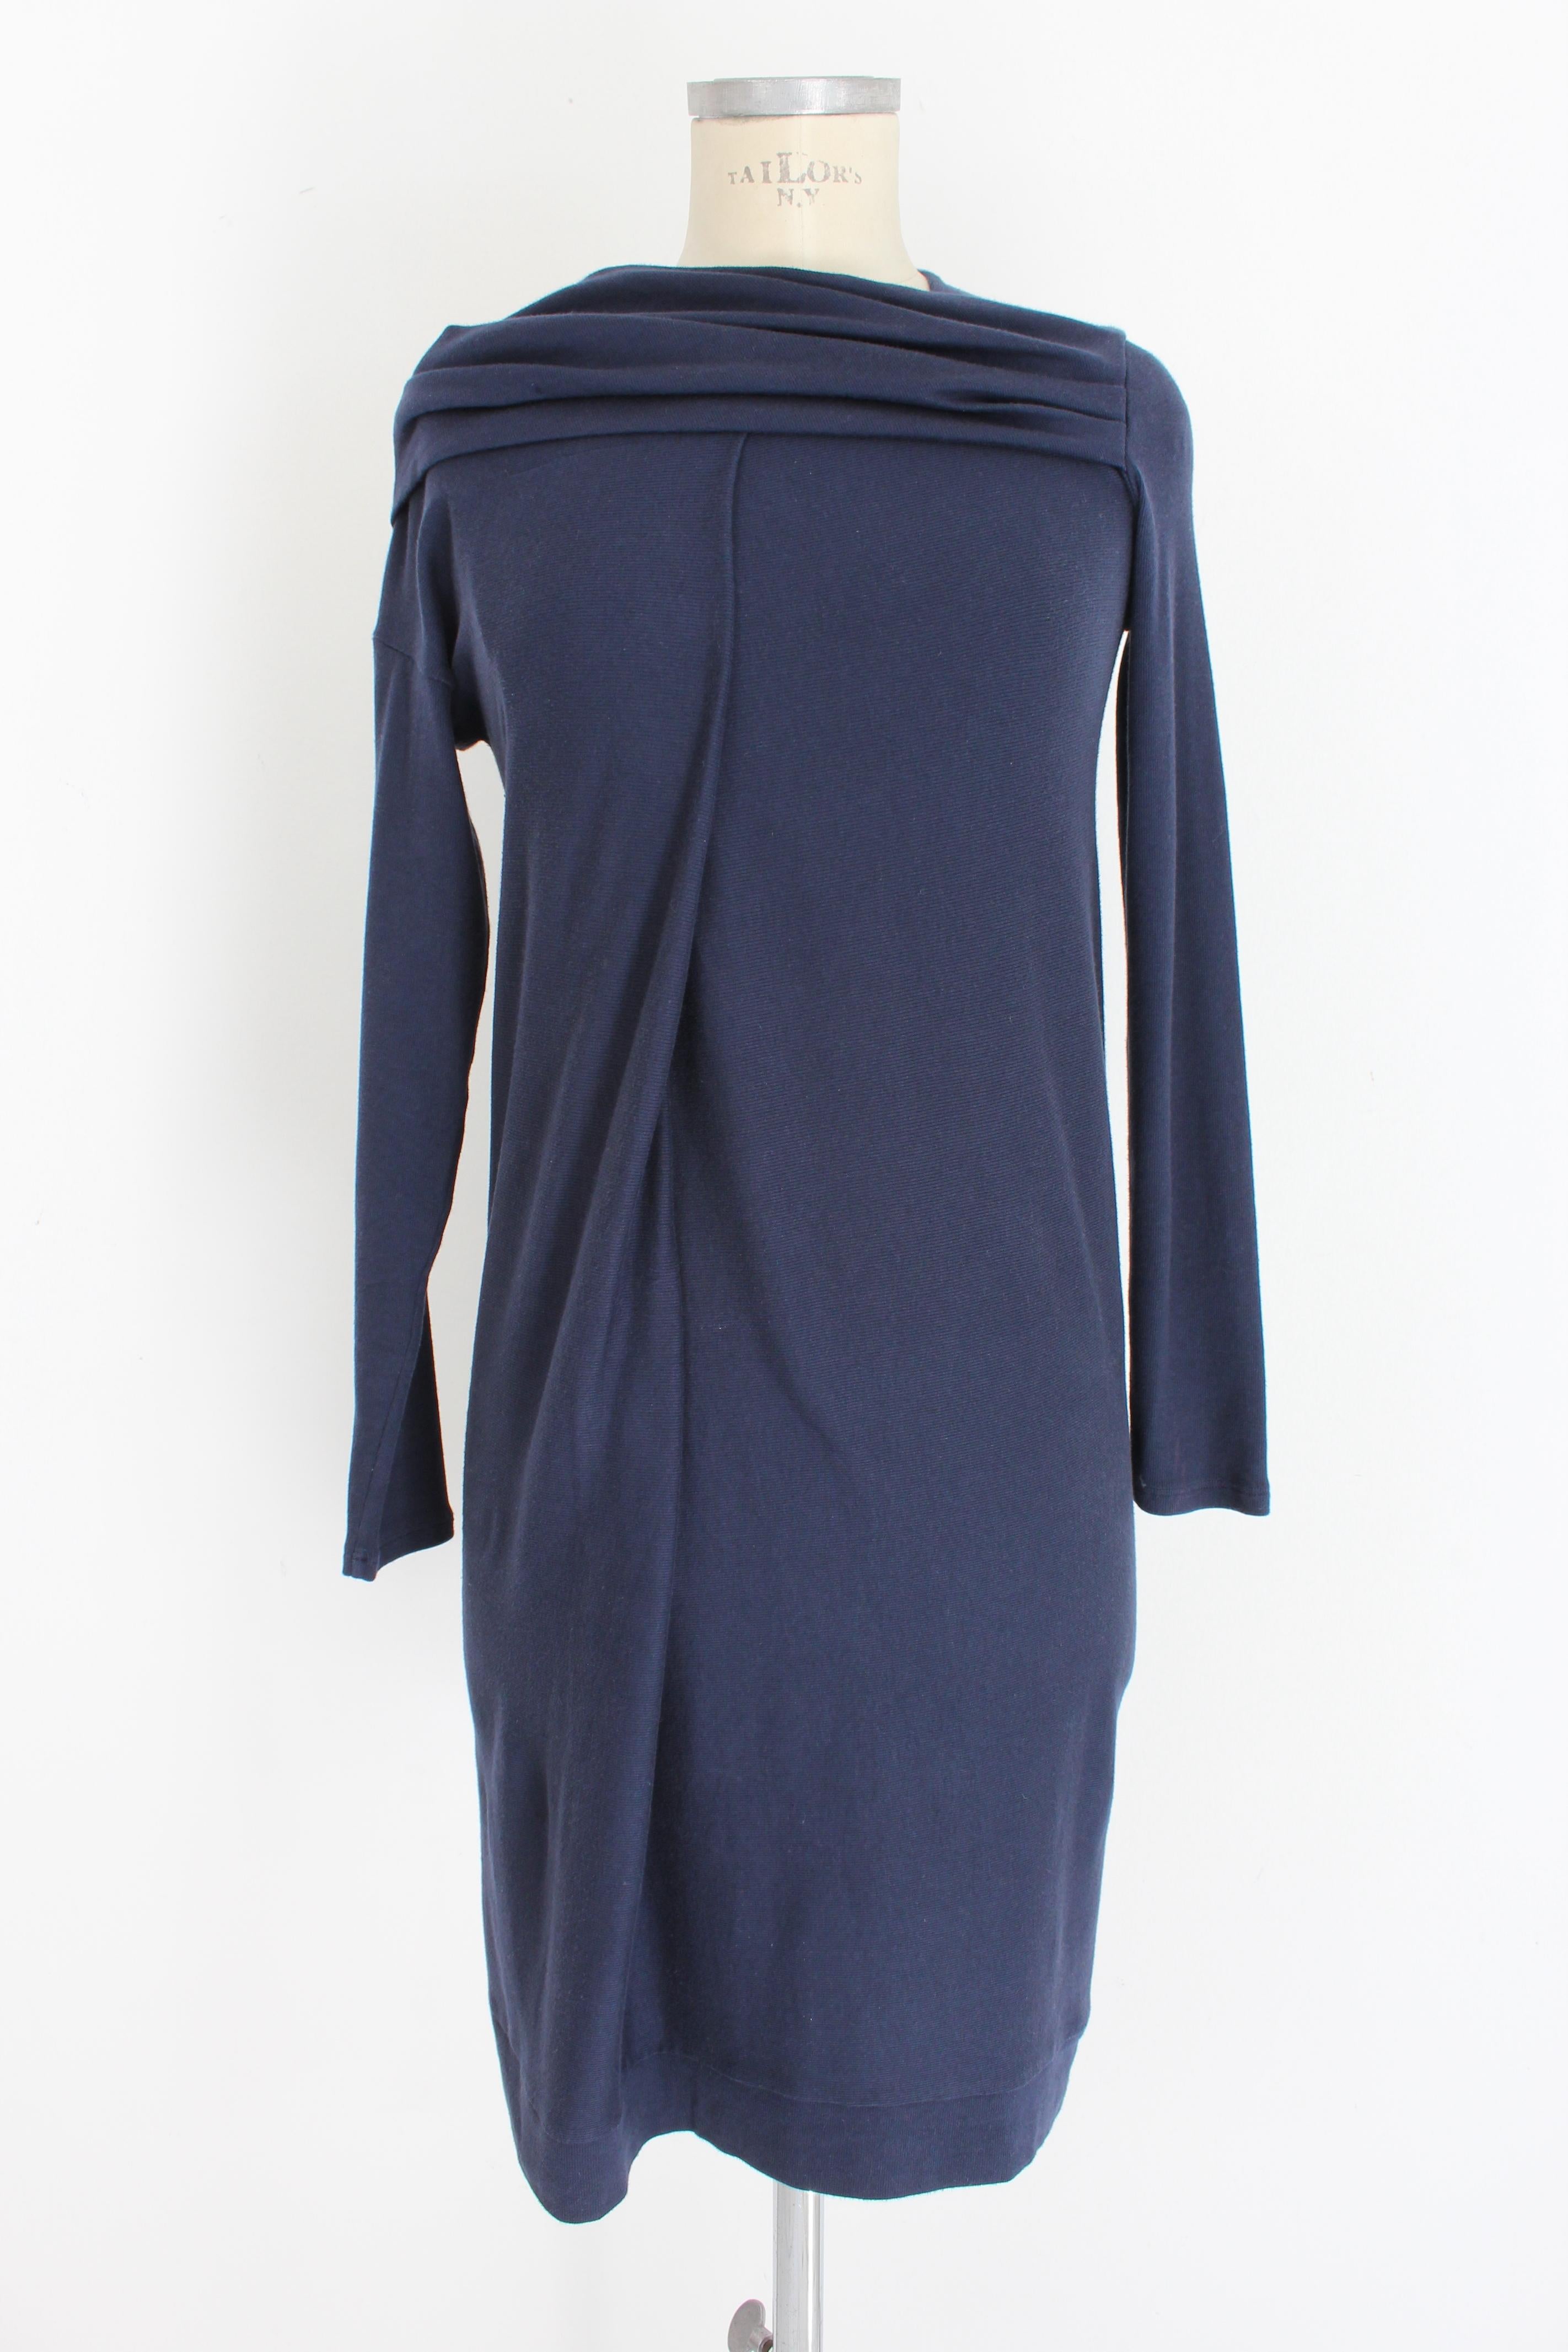 Brunello Cucinelli 2000s woman dress. Sheath dress, close-fitting to the body, with embossed collar. Blue color, 94% cotton, 6% lycra fabric. Made in Italy.

Condition: Excellent

Item used few times, it remains in its excellent condition. There are